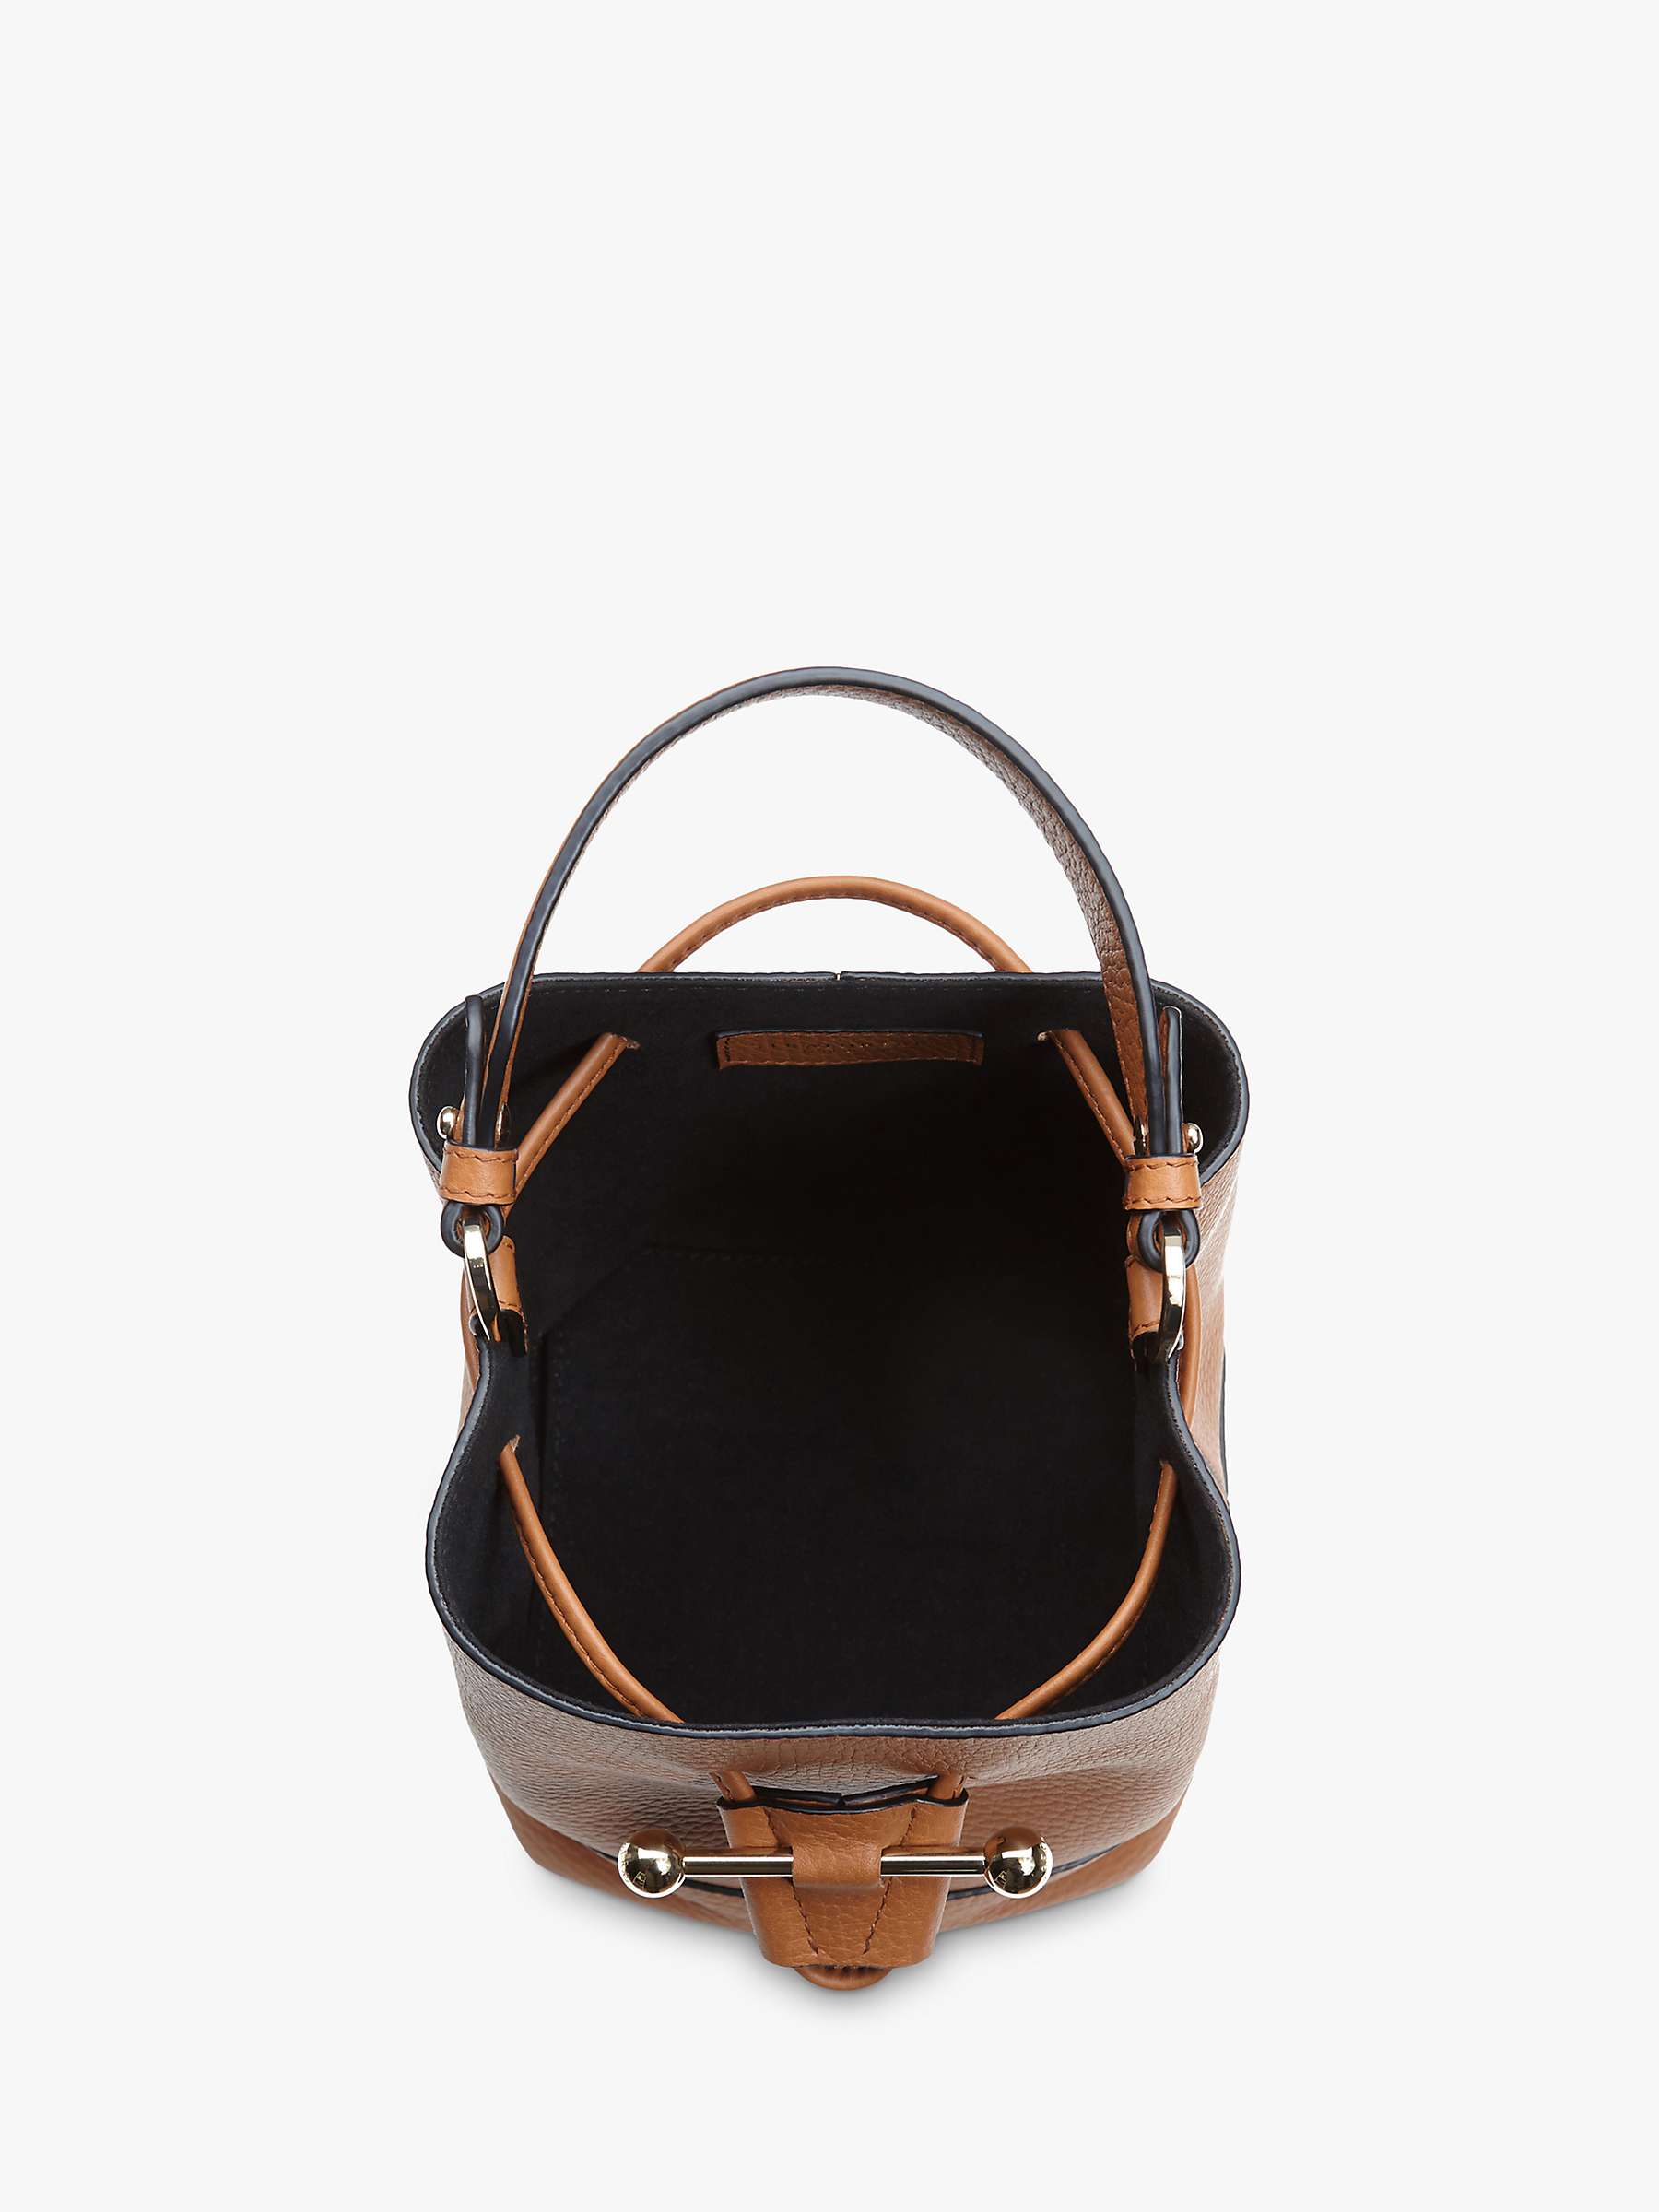 Buy Strathberry Lana Osette Leather Bucket Bag Online at johnlewis.com